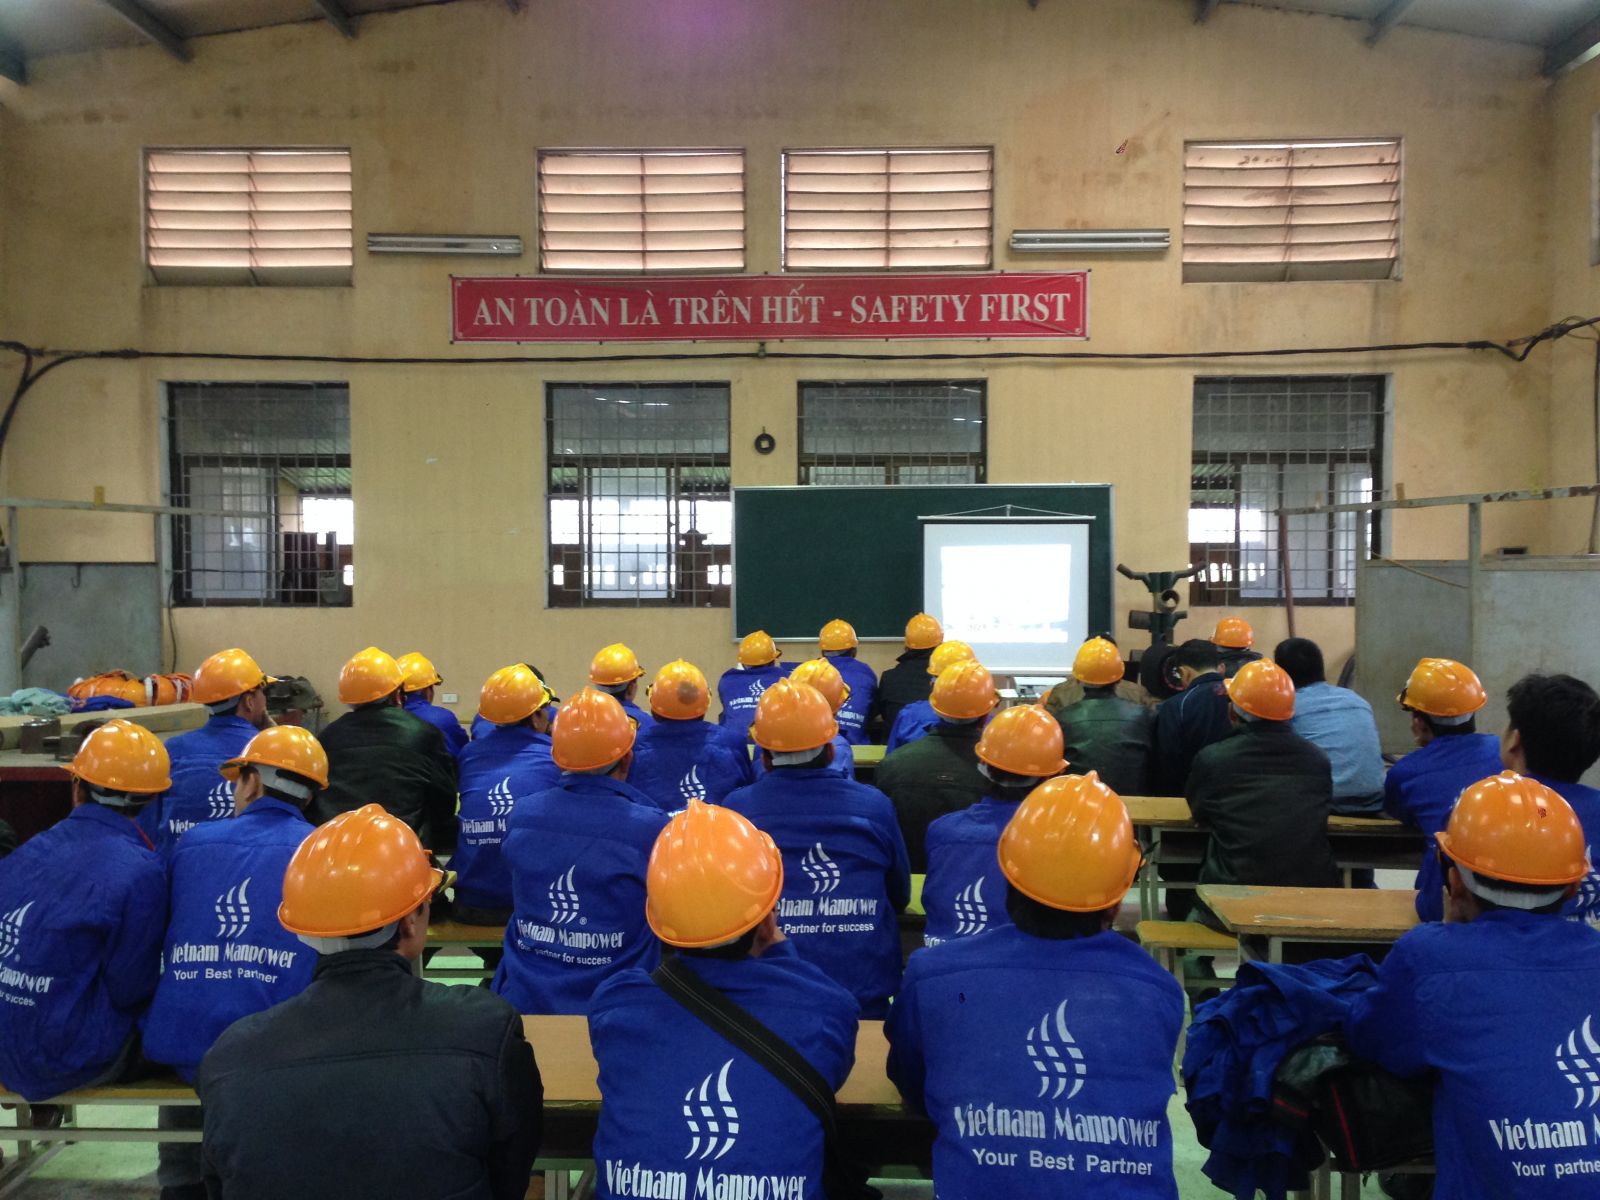 Our construction workers attended early to listen to the introduction of Safe Track Contracting Company and opening jobs